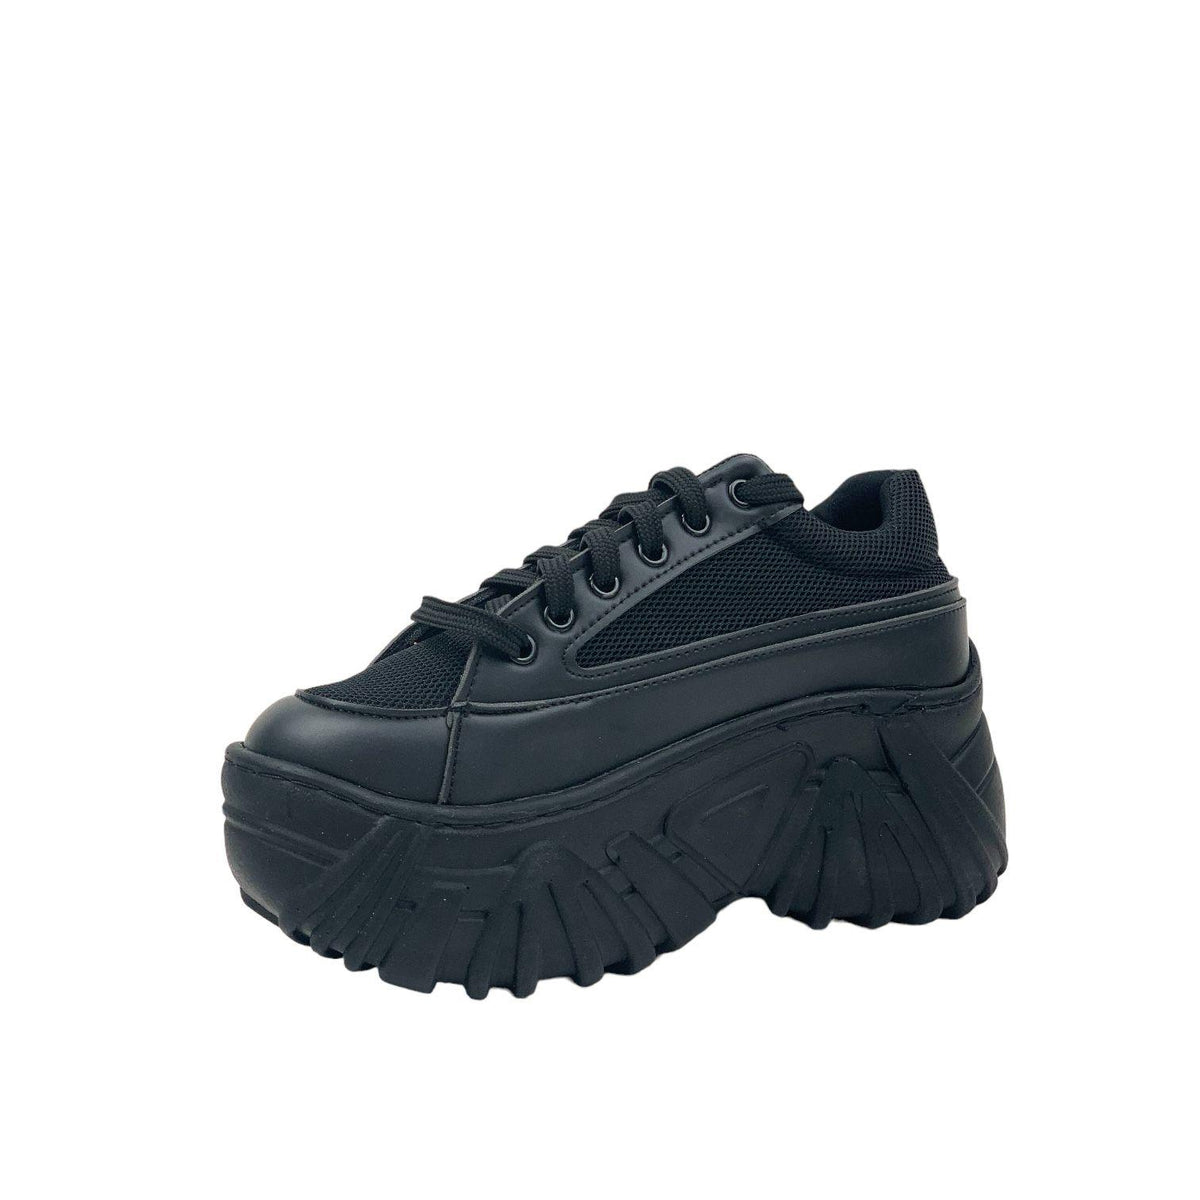 Women's shanny black high sole sneaker sports shoes - STREETMODE™